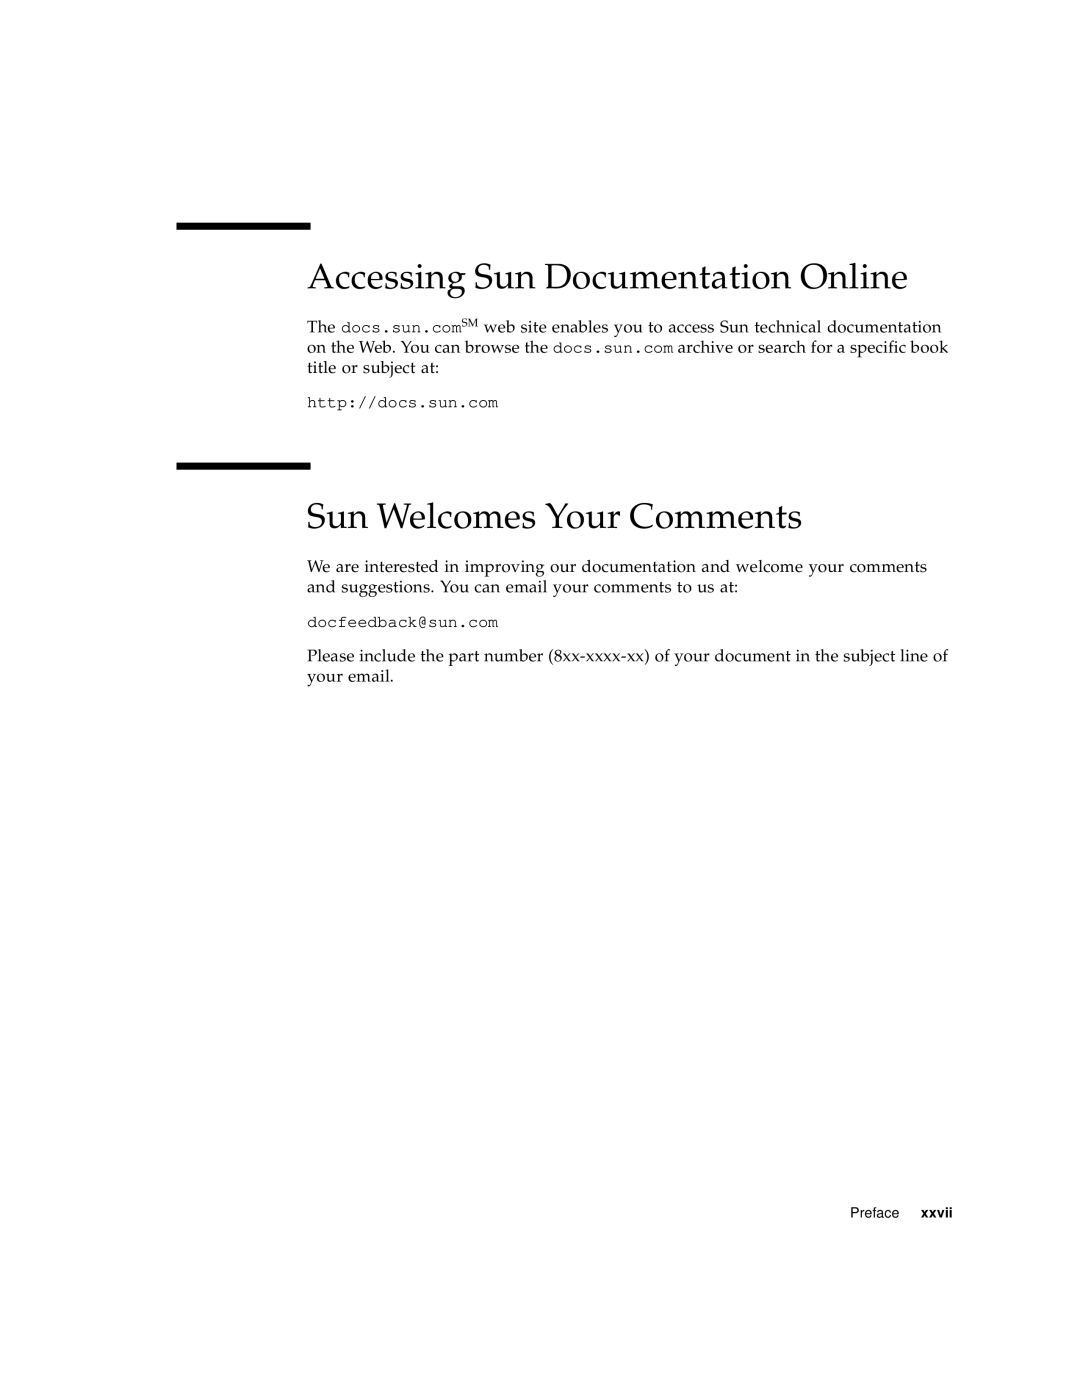 Sun Microsystems 220R manual Accessing Sun Documentation Online, Sun Welcomes Your Comments, http//docs.sun.com 